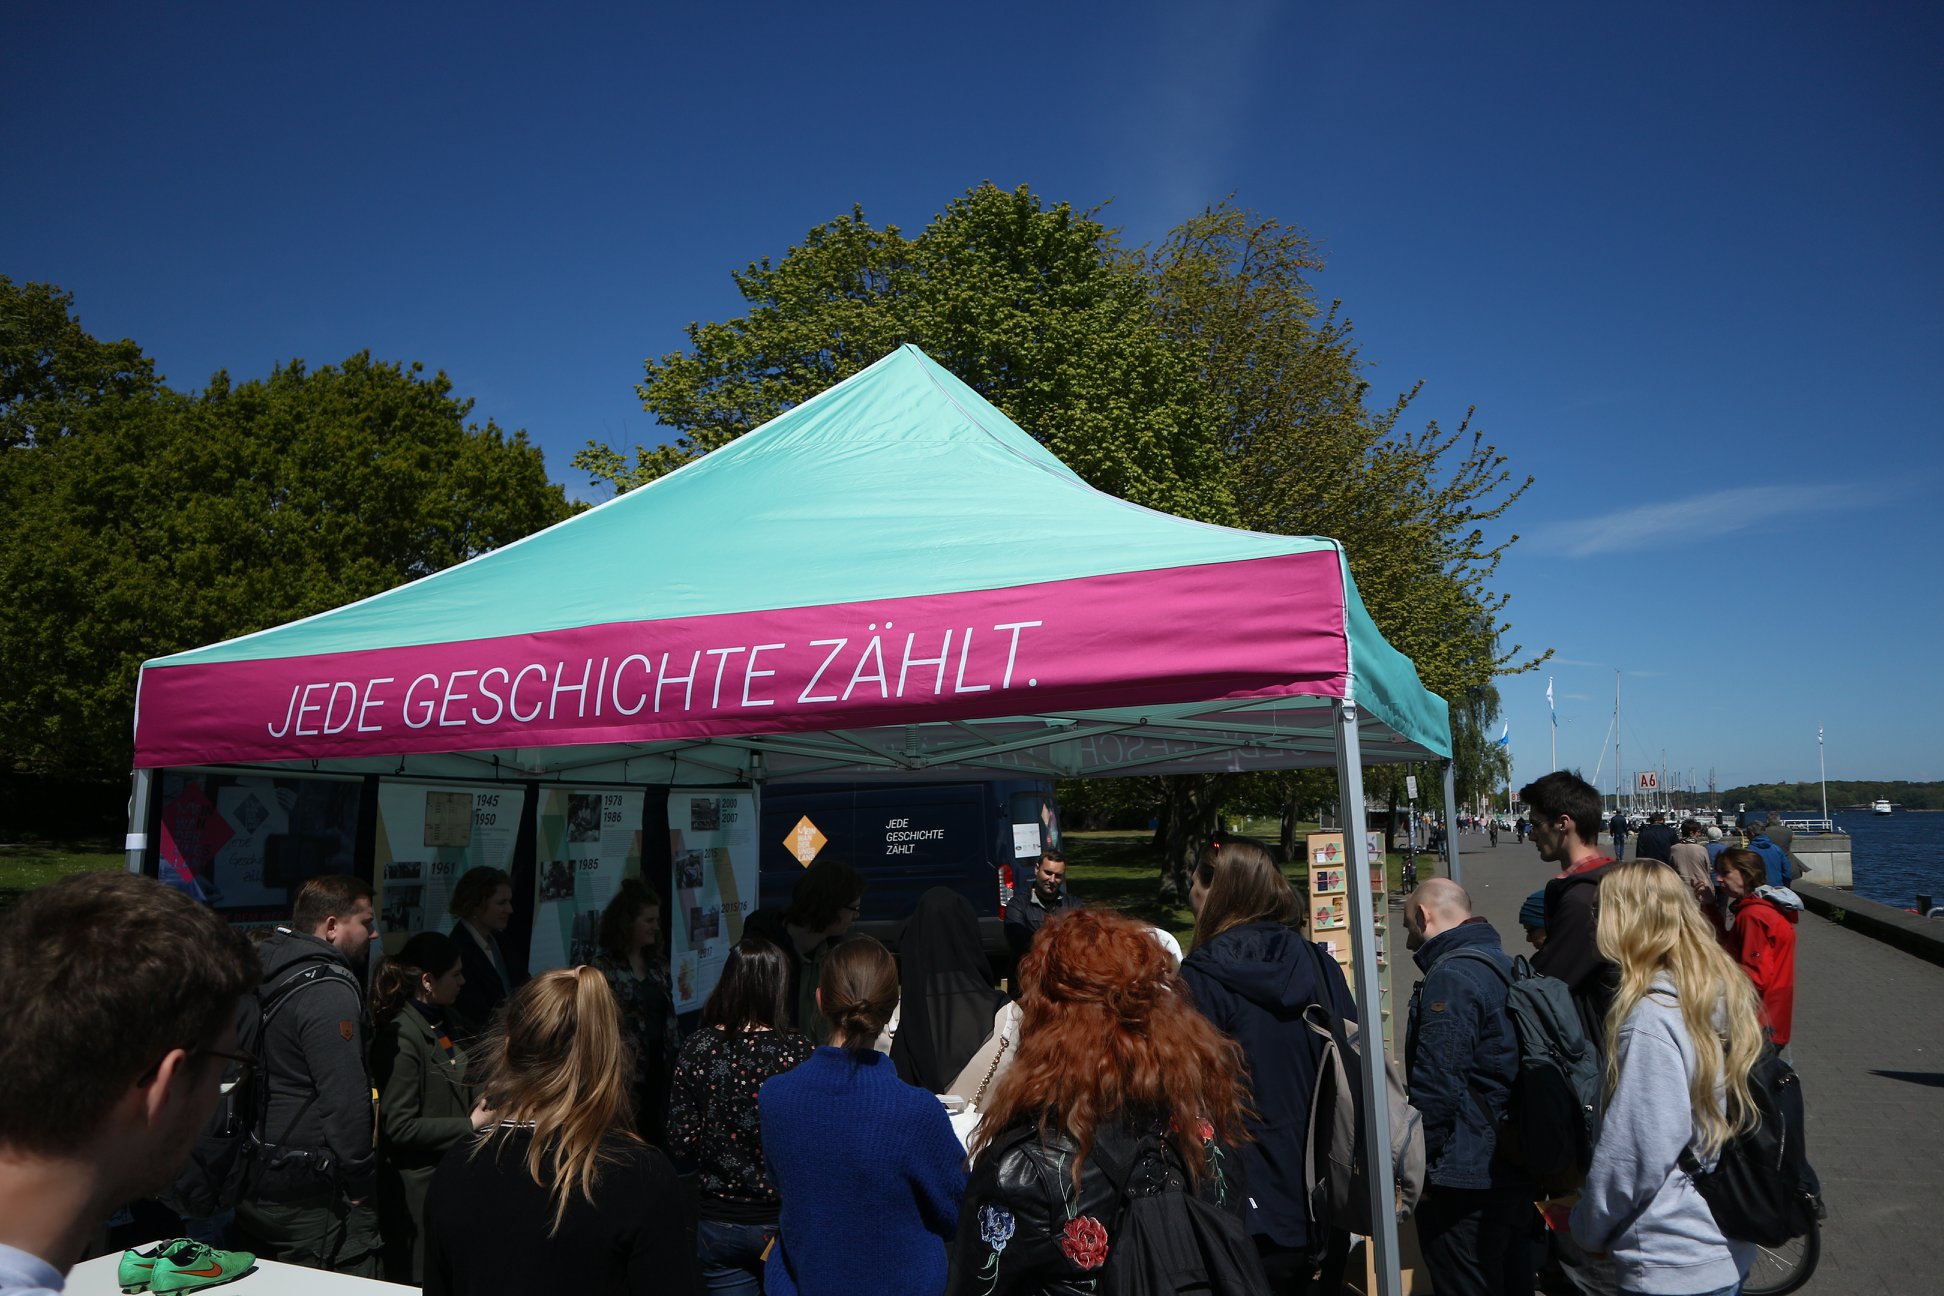 2019: Since the beginning of February, #Meinwanderungsland has been touring across Germany. In 24 different cities, the team set up the interactive exhibition and storytelling platform, organized workshops and city tours. The goal of the exhibition was to convey migration as a normal case to visitors. Under the hashtag #Meinwanderungsland, many submitted their own photo and video contributions and thus helped shape the exhibition through their own stories. Highlights of the #Meinwanderungsland tour included the opening in the Düsseldorf state parliament as well as workshops and events in Mannheim, Erfurt, Dresden, Magdeburg, Bremen and Berlin. The conclusion of the #Meinwanderungsland tour in Hamburg with the concert of Esther Bejarano and the Microphone Mafia was also particularly nice. Photo: DOMiD Archive, Cologne